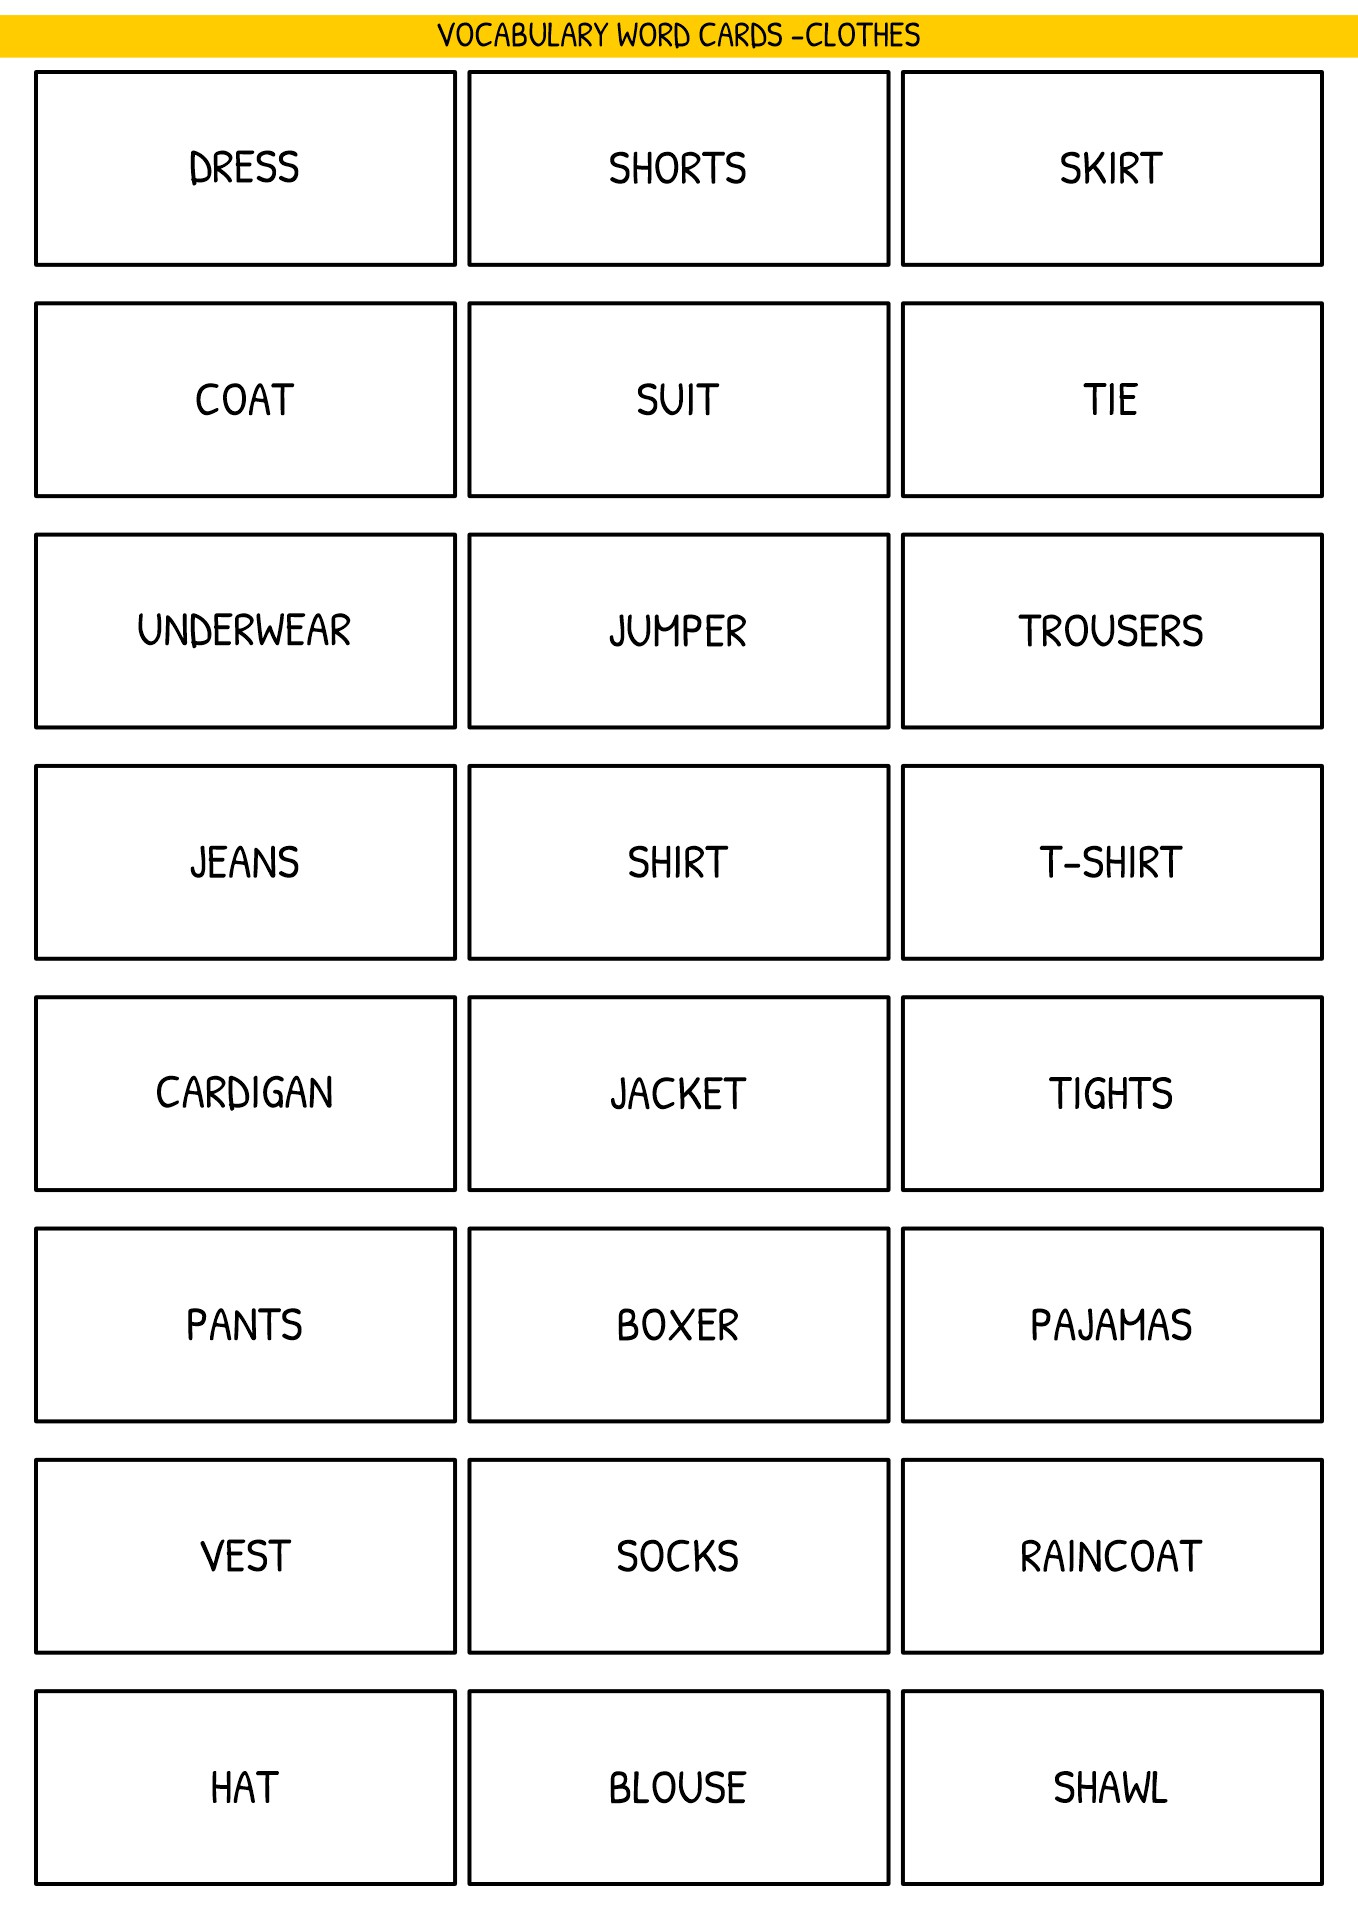 Vocabulary Word Cards Template Image